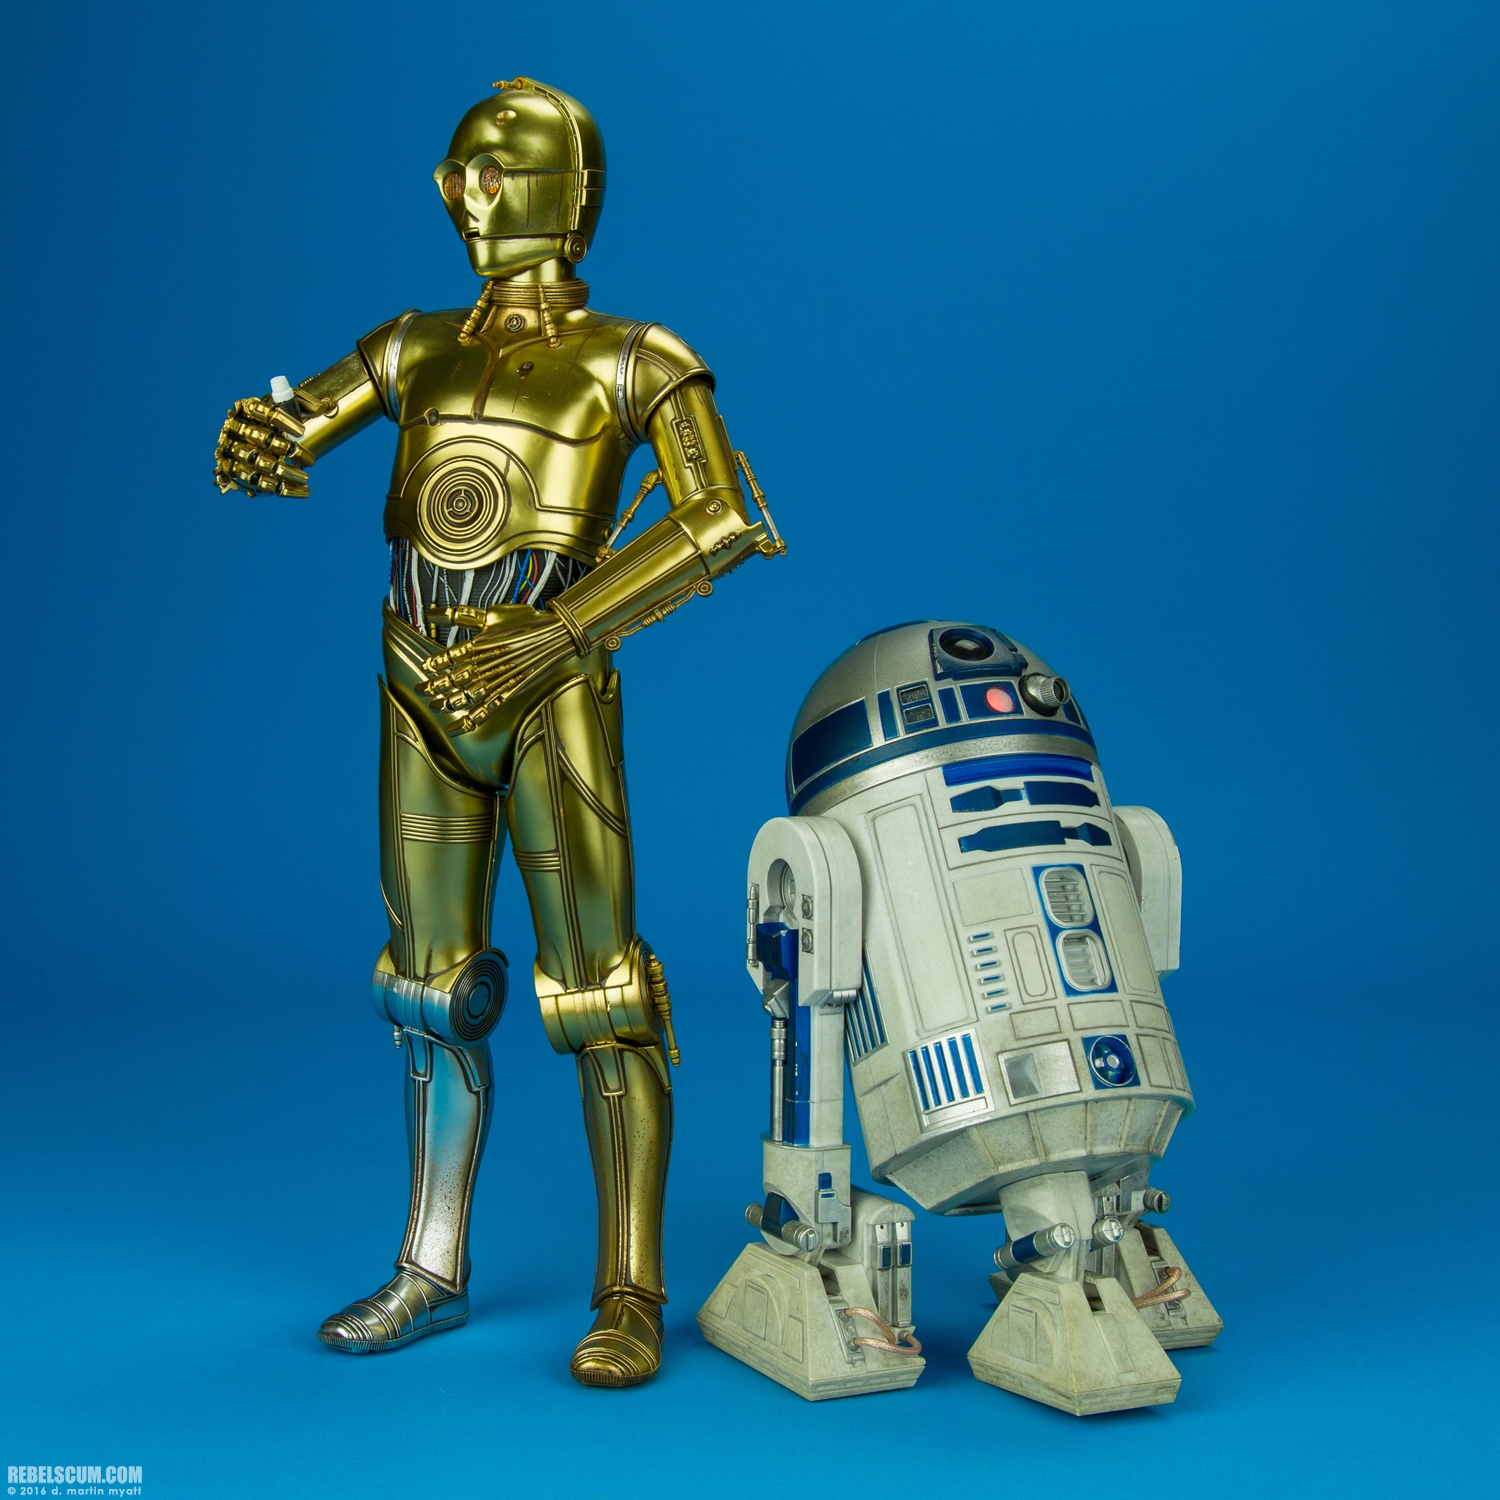 C-3PO-Sixth-Scale-Figure-Sideshow-Collectibles-021.jpg